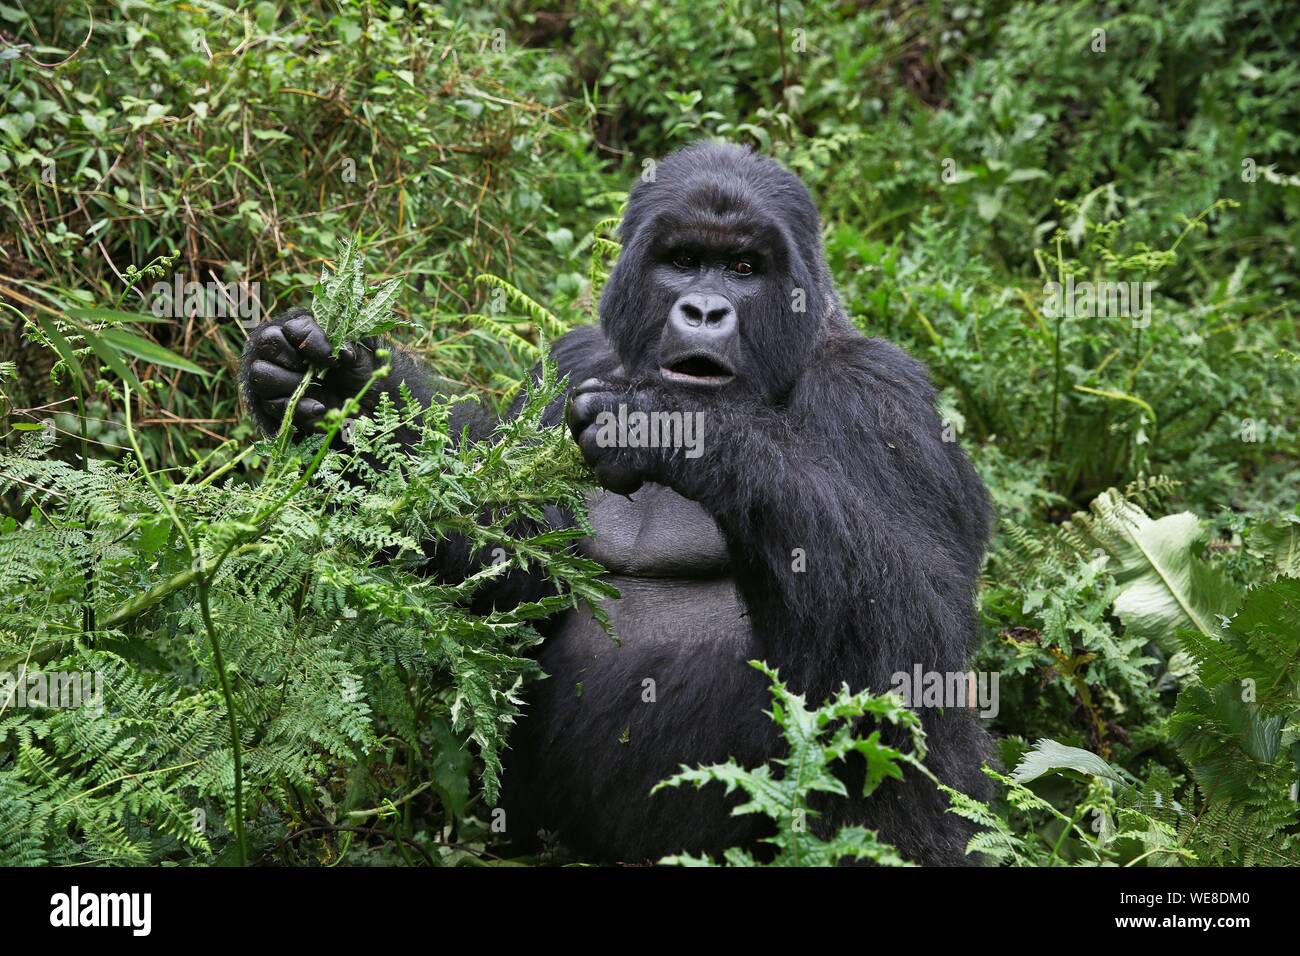 Rwanda, Volcanoes National Park, Male Mountain Gorilla or Silverback Eating Leaves in a Forest Glade Stock Photo